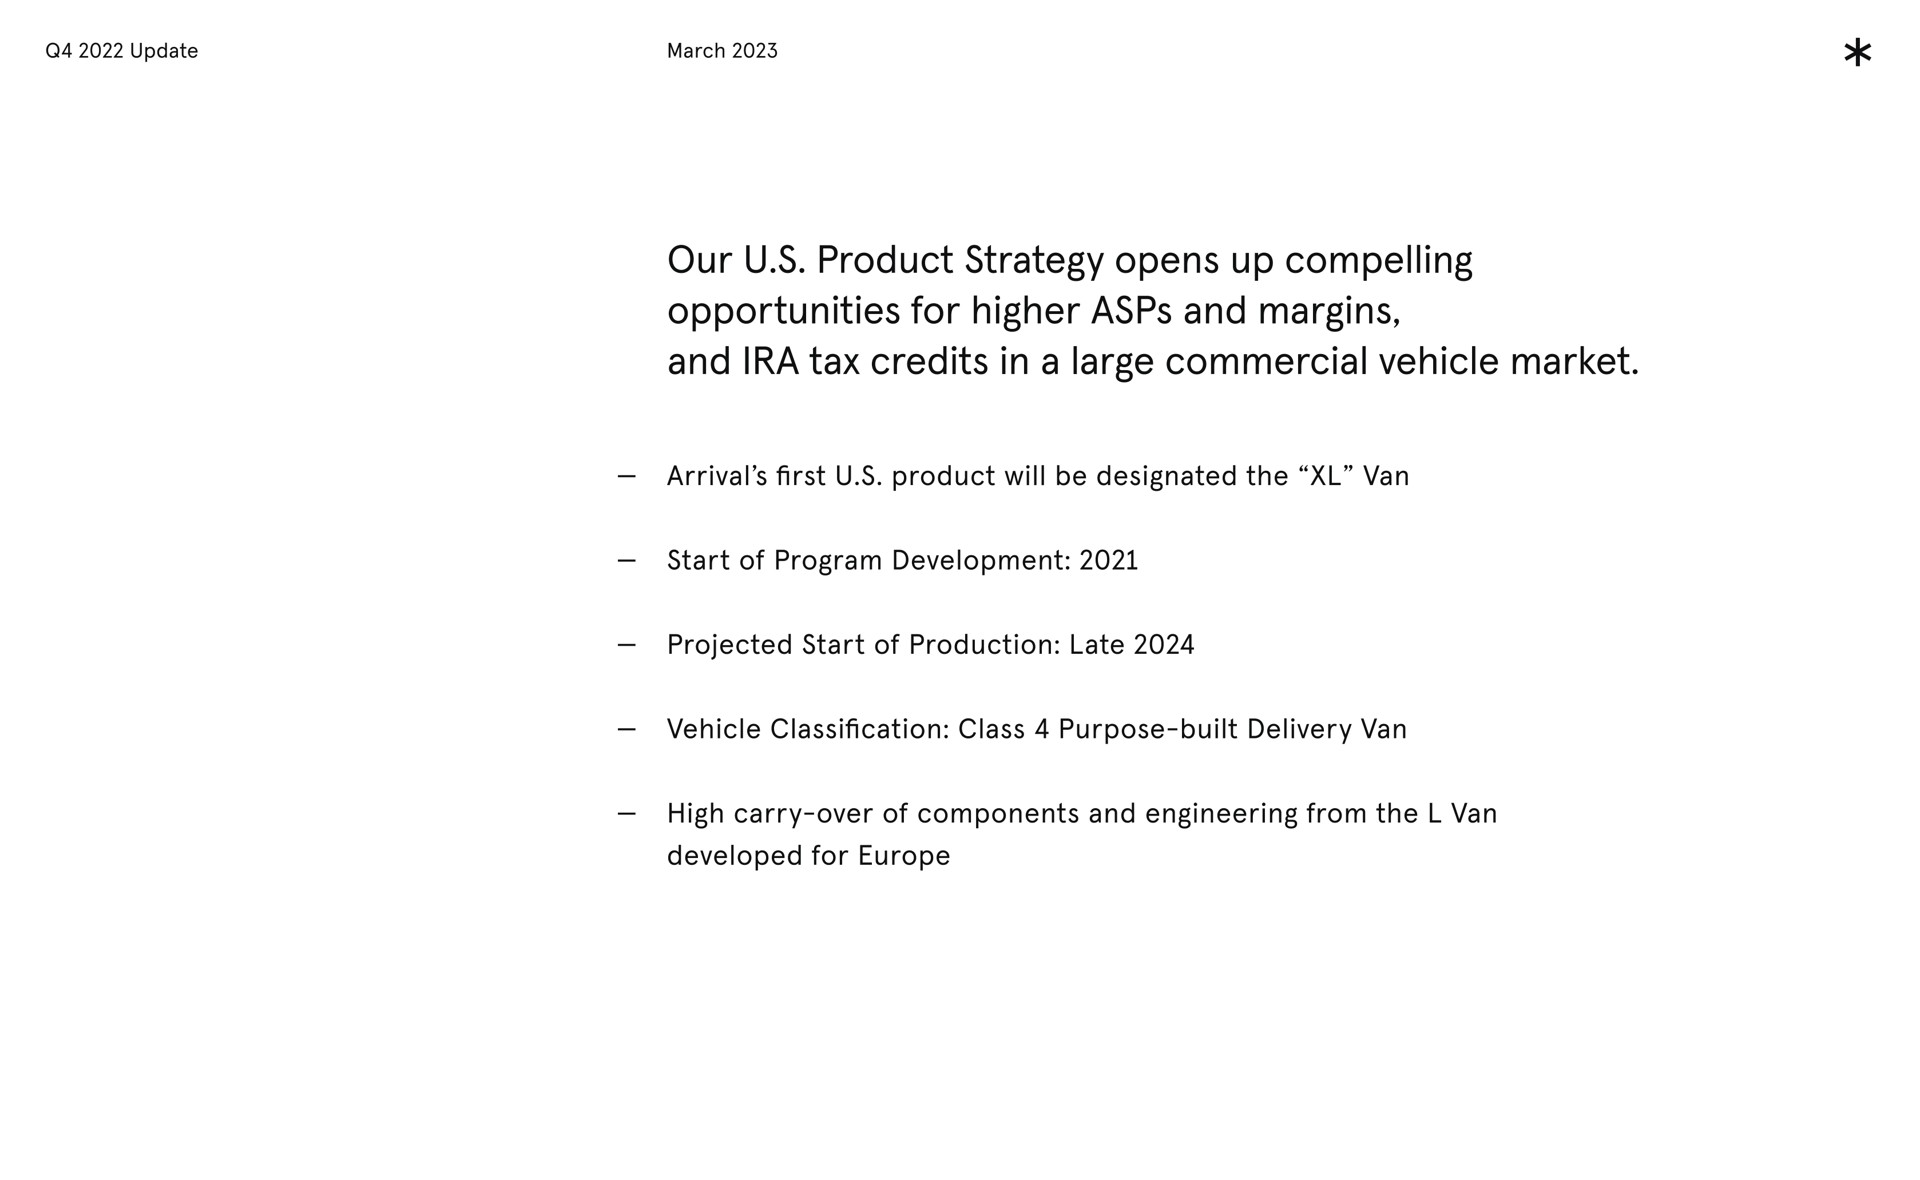 our product strategy opens up compelling opportunities for higher asps and margins and tax credits in a large commercial vehicle market arrival product ill designated the start of program projected start of late vehicle lass purpose high carry over of components and engineering from the van developed for update first will be development production classification class purpose built delivery | Arrival